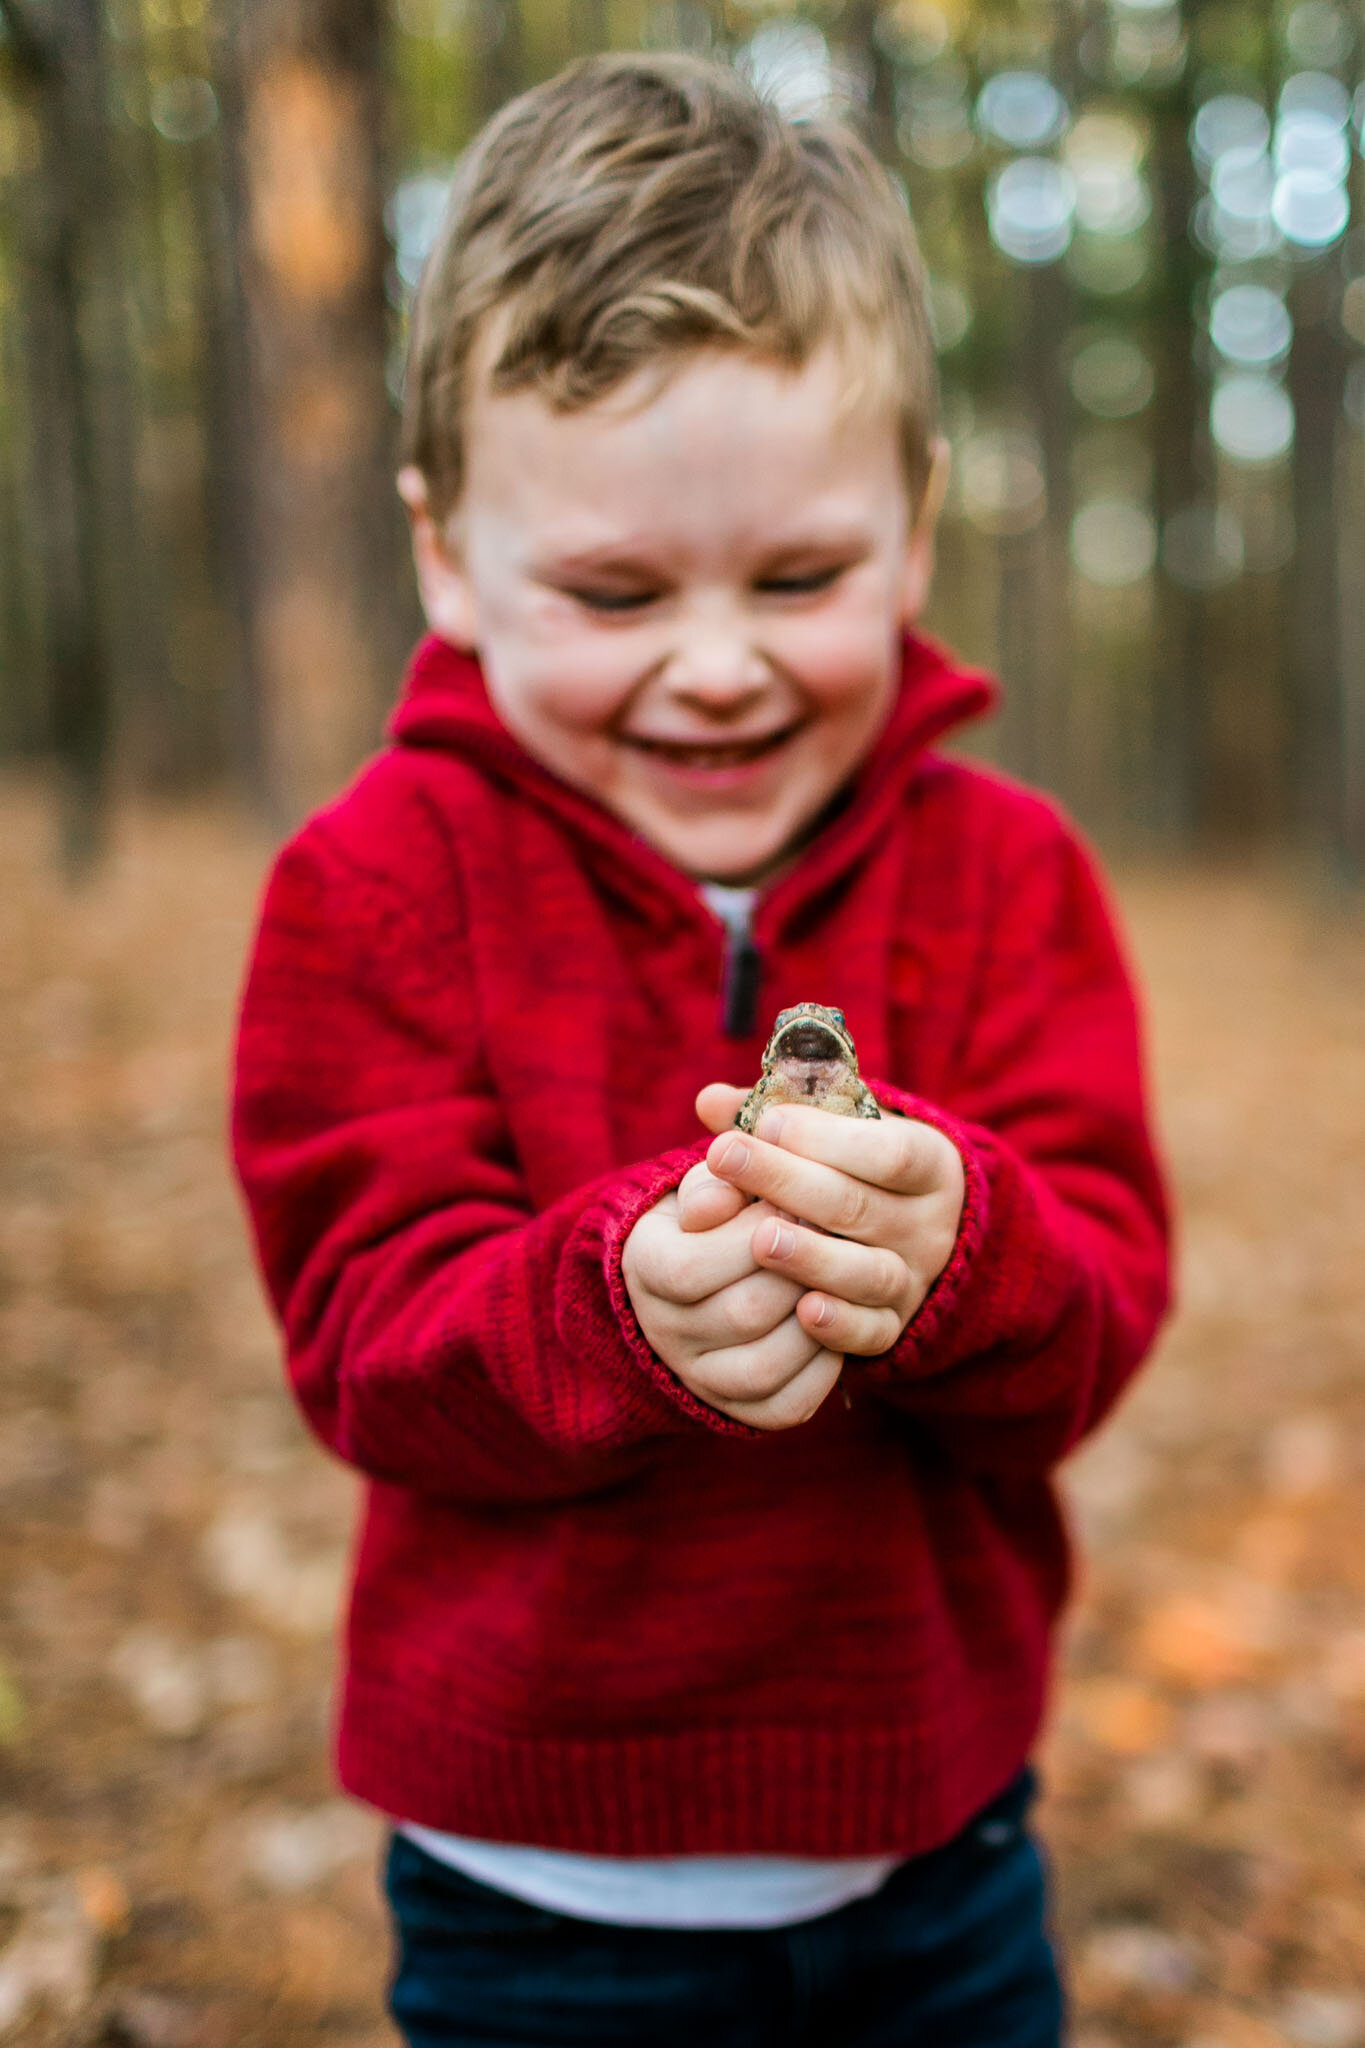 Raleigh Family Photographer | By G. Lin Photography | Toad jumping from boy's hands